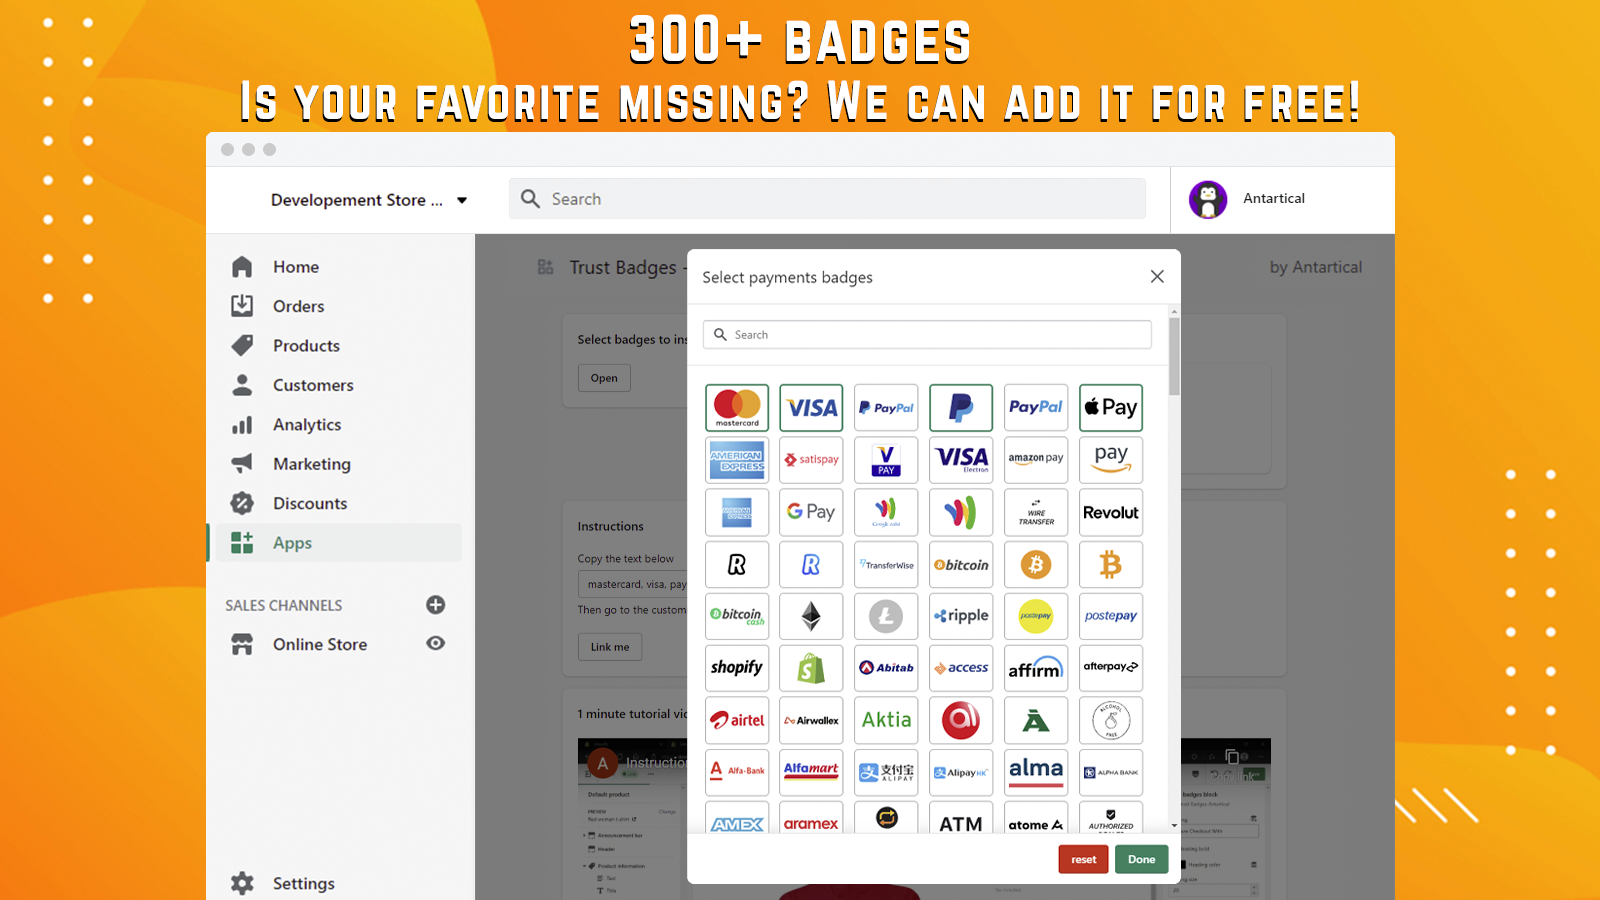 300+ badges. Is your favorite missing? We can add it for free!